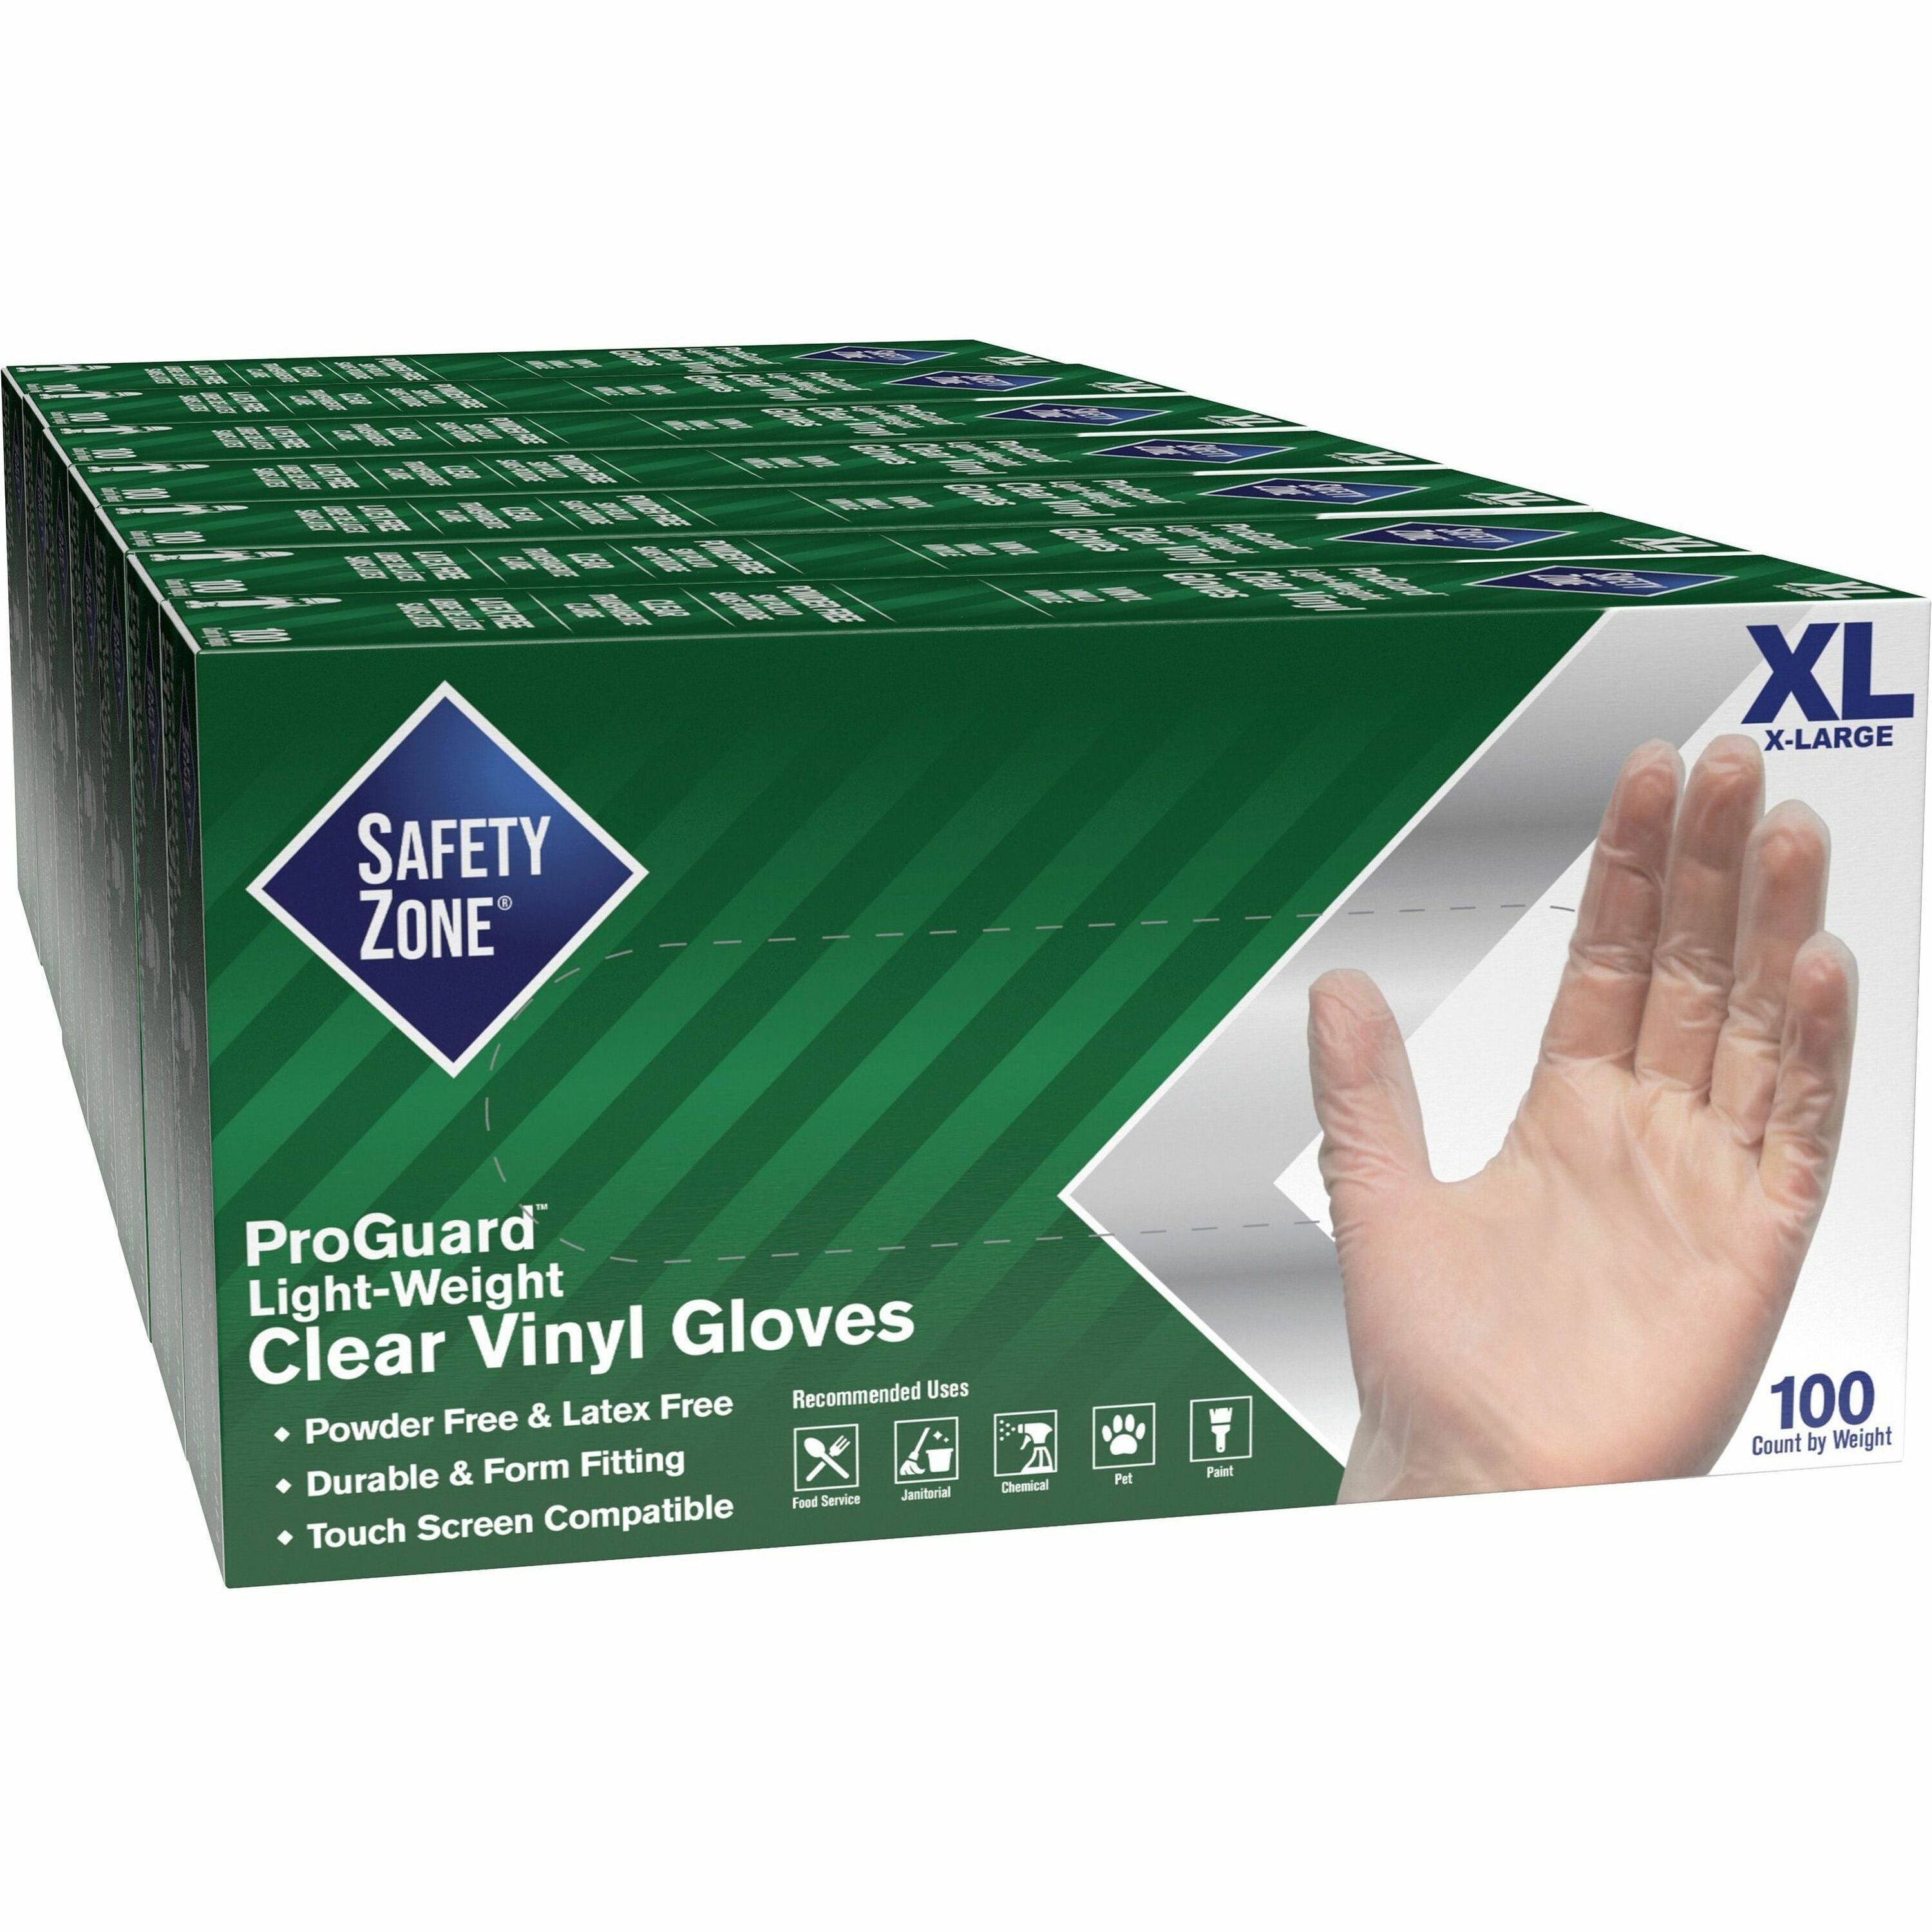 safety-zone-powder-free-clear-vinyl-gloves-x-large-size-clear-latex-free-dehp-free-dinp-free-pfas-free-for-food-preparation-cleaning-1000-carton-925-glove-length_szngvp9xlhhct - 1